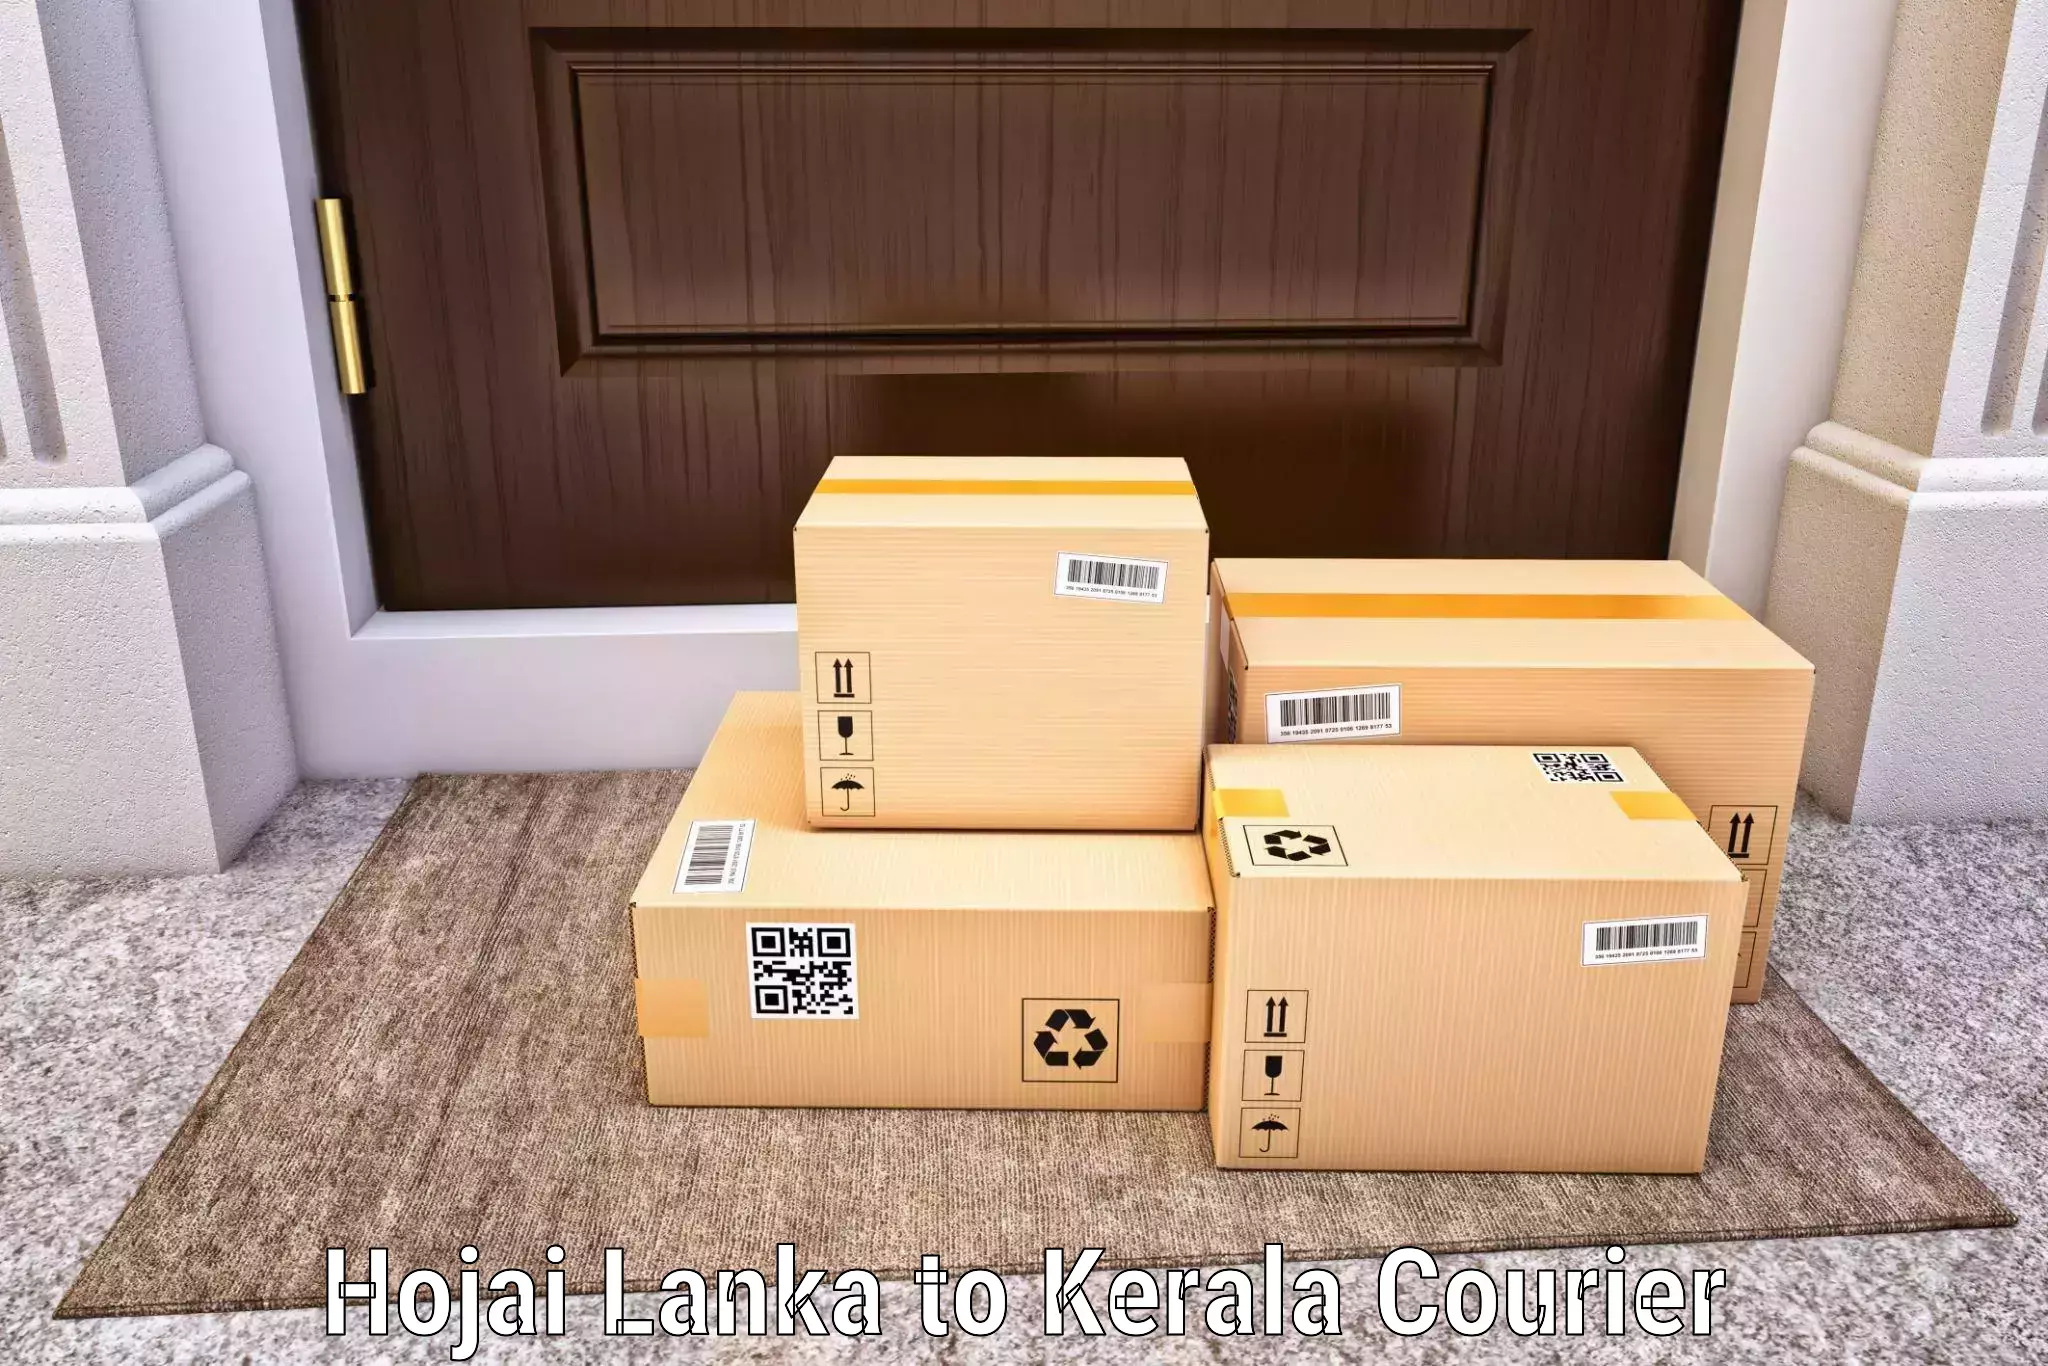 Round-the-clock parcel delivery Hojai Lanka to Kerala